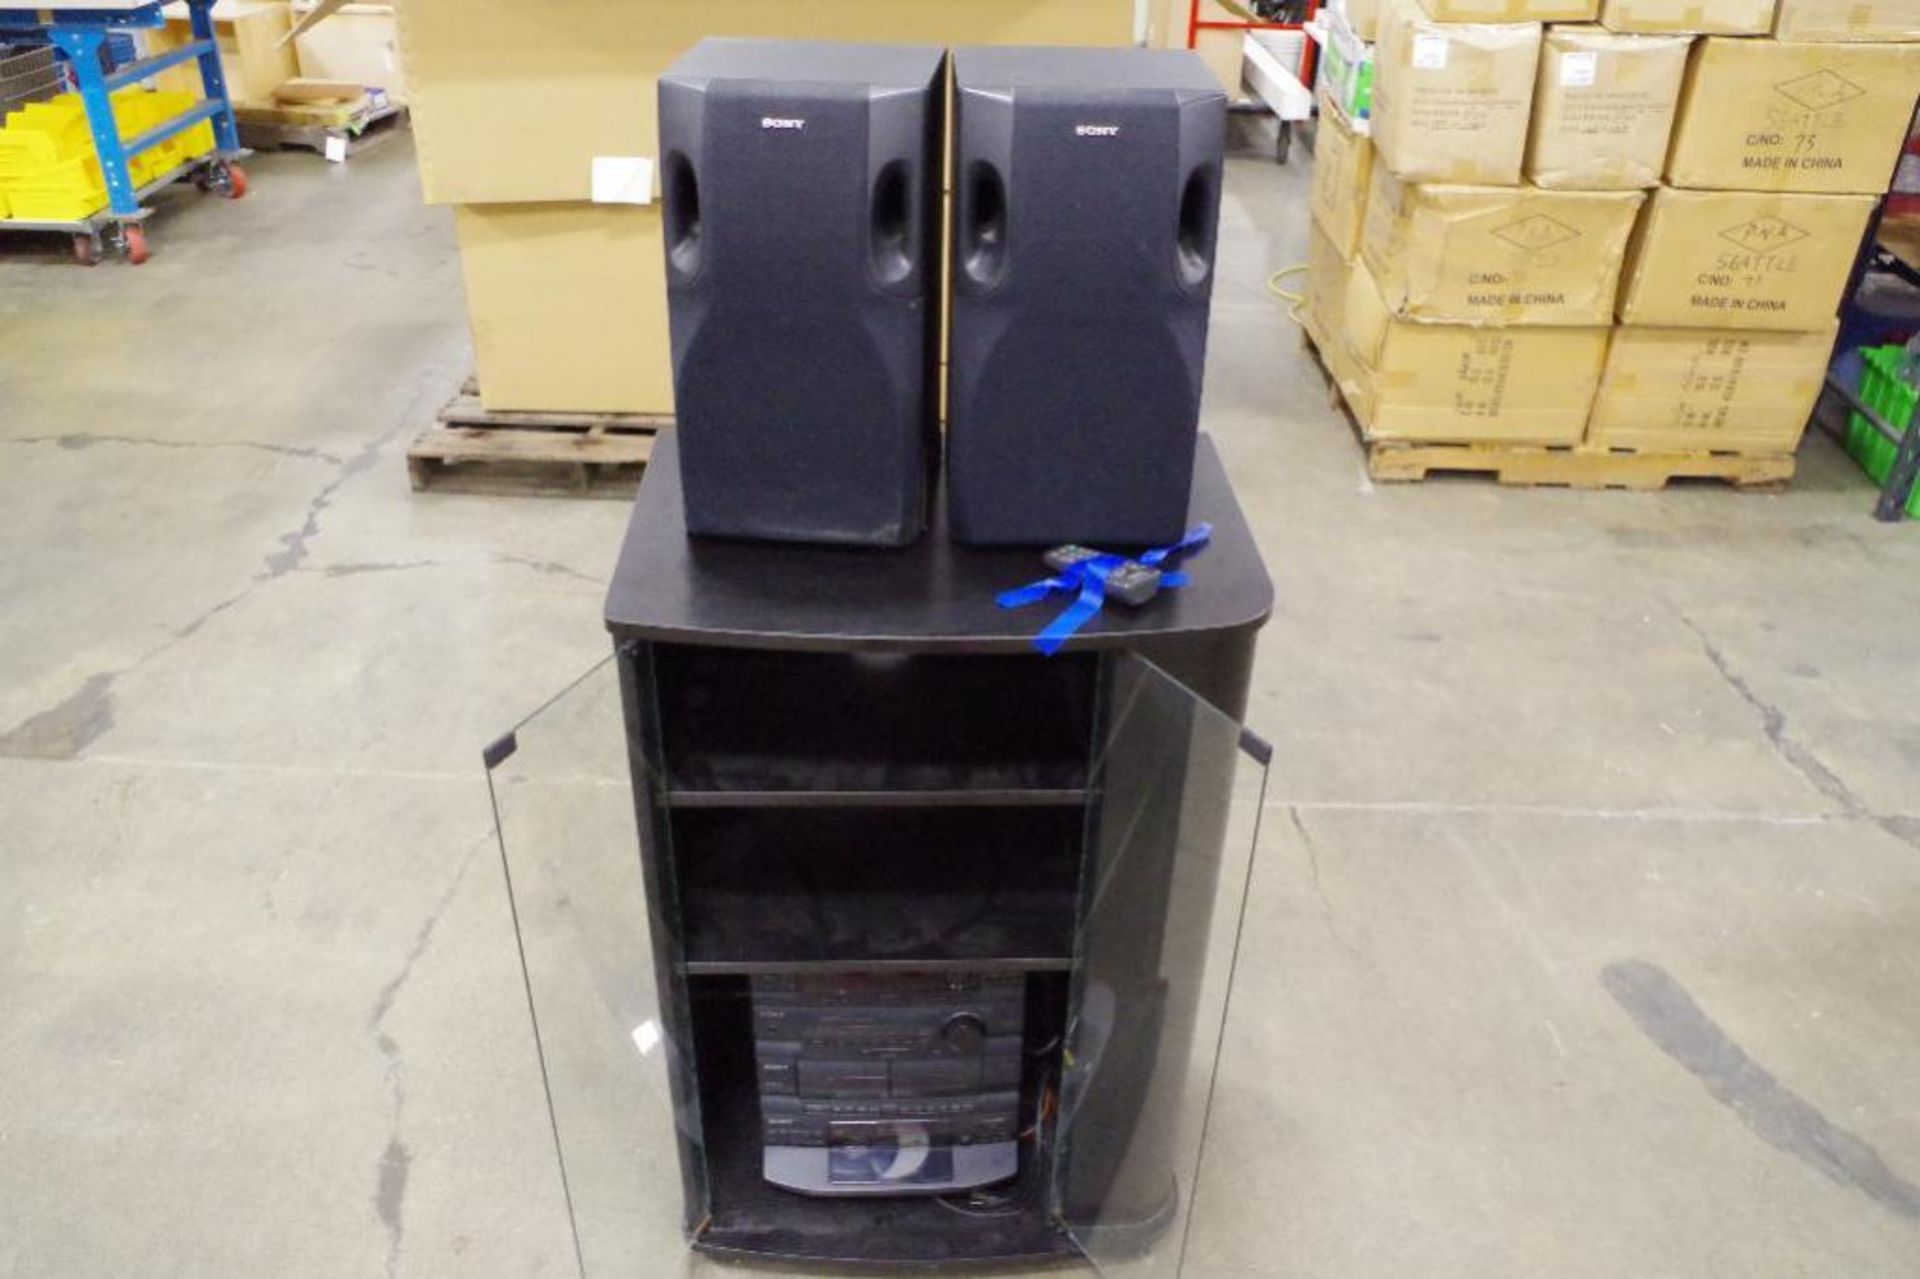 SONY Rack Style Stereo System w/ Speakers, Remote Control & Cabinet M/N LBT-D270 - Image 3 of 8